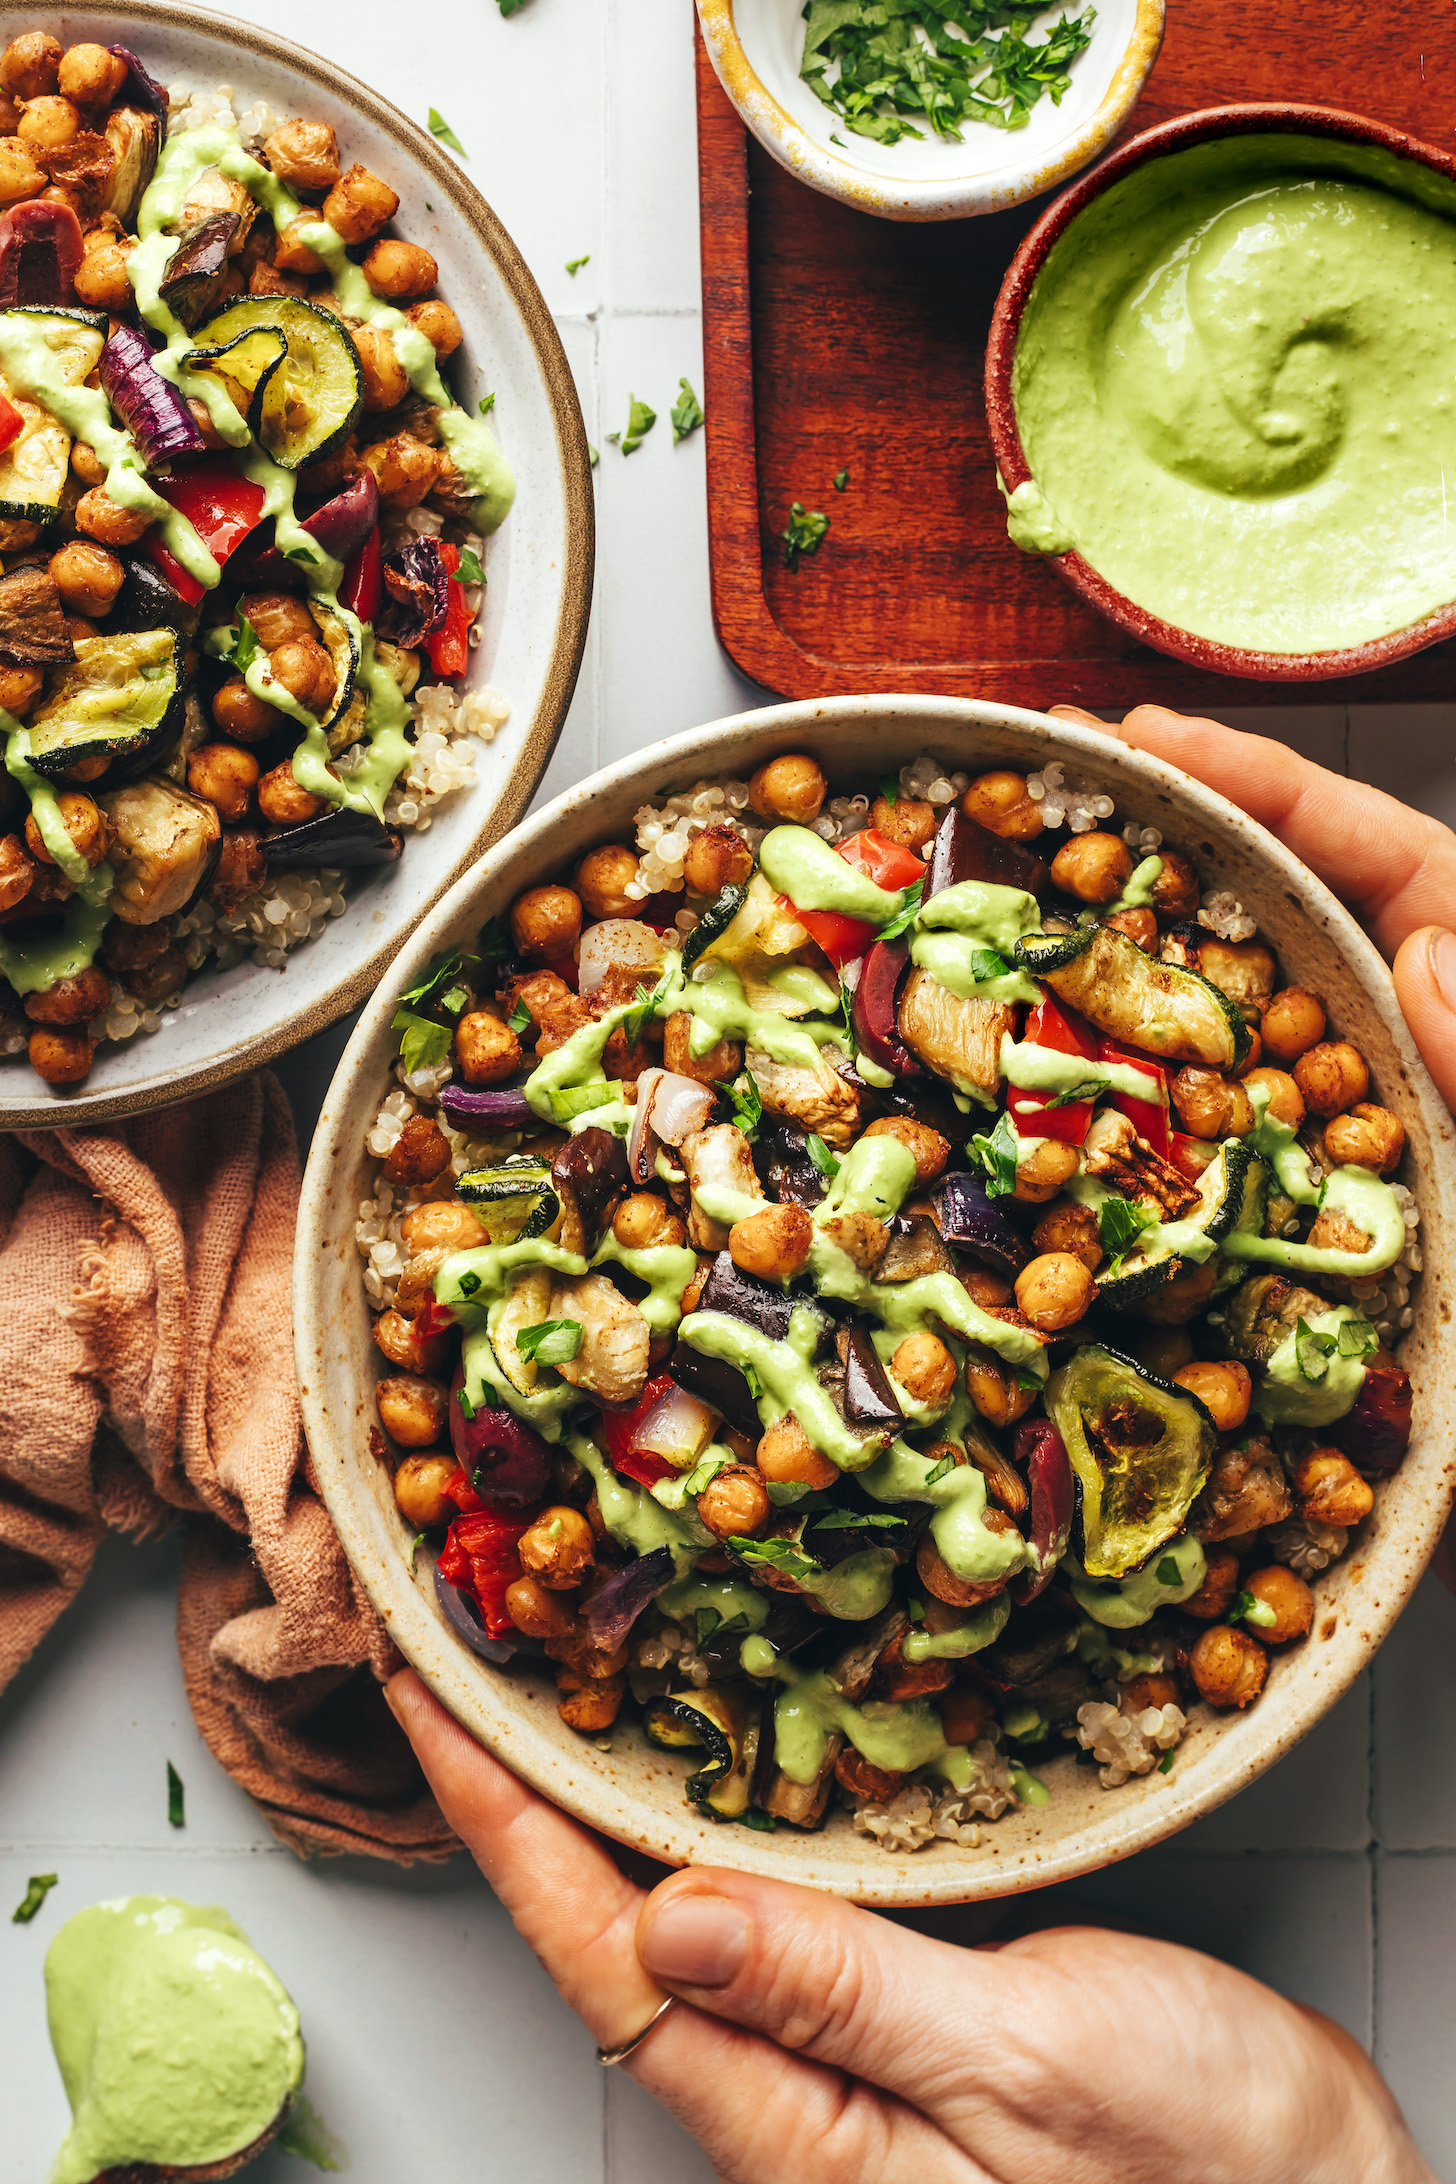 Hands holding the sides of a roasted veggie and chickpea bowl with green tahini sauce